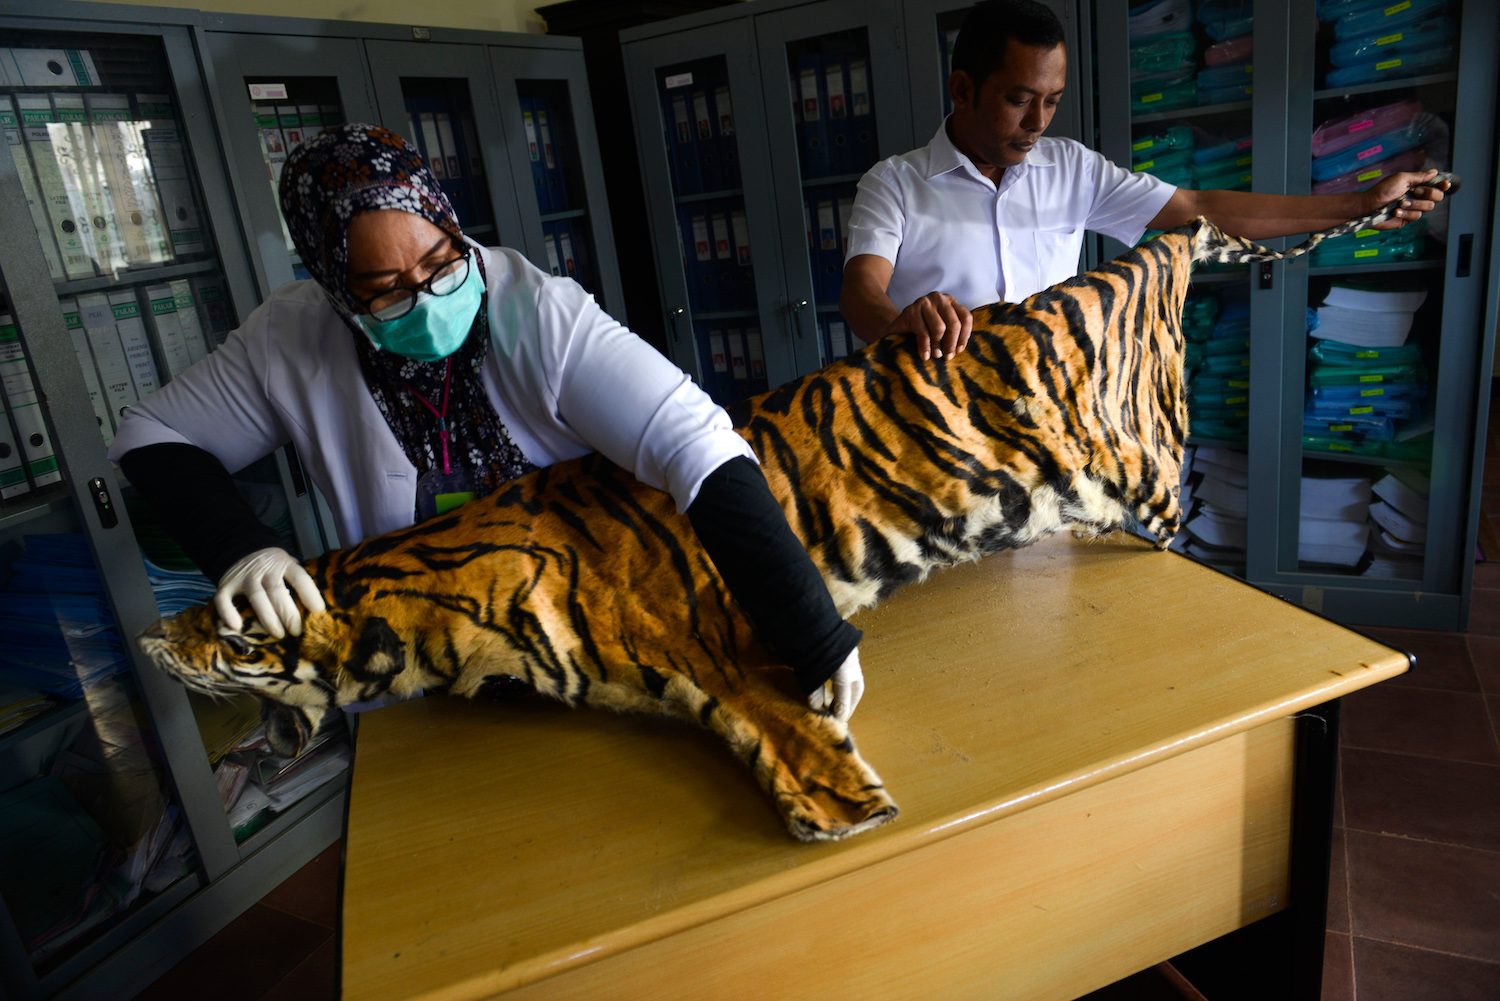 Wildlife conservation officials check the confiscated skin of a Sumatran tiger seized from a poacher in Banda Aceh, Indonesia. (AFP)